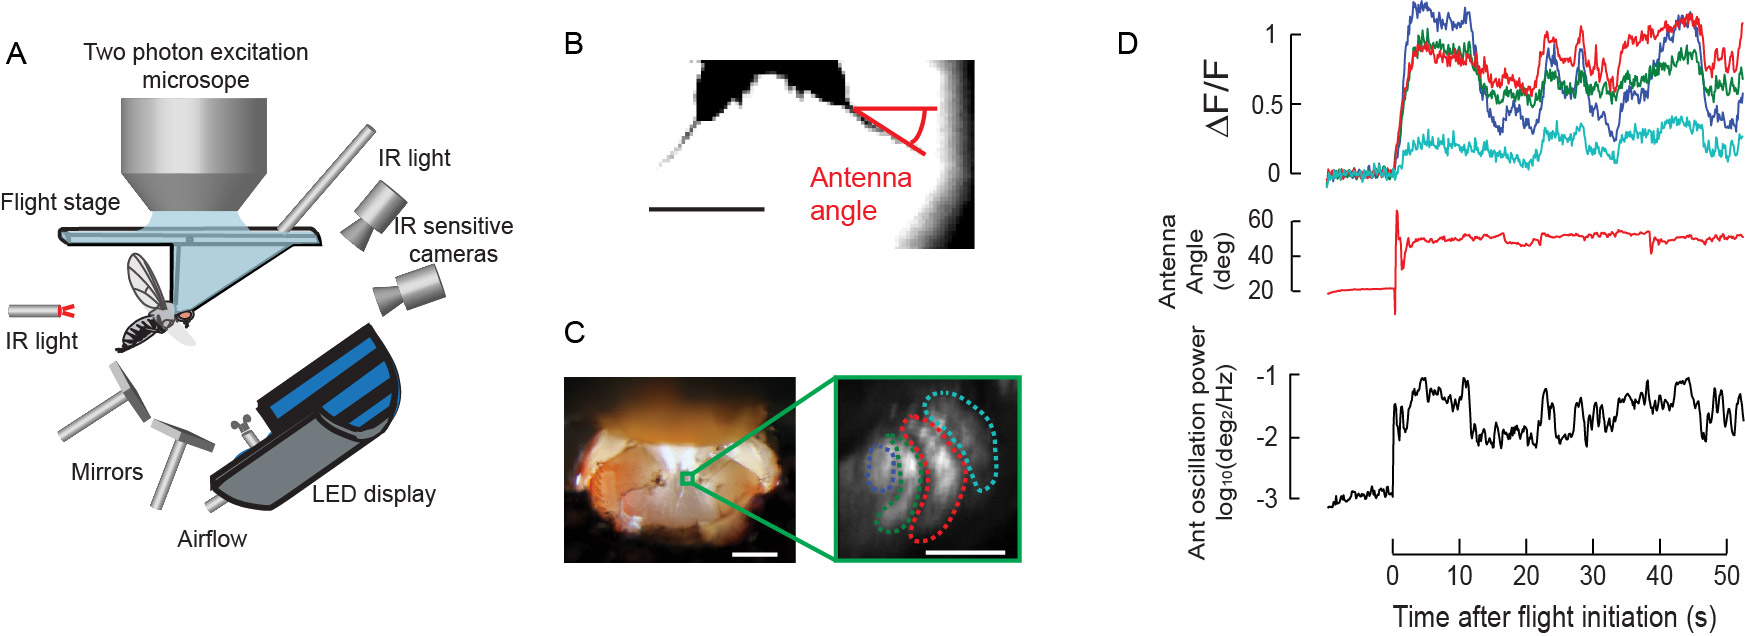 Simultaneous 2-photon calcium imaging and antenna tracking in a flying fruit fly